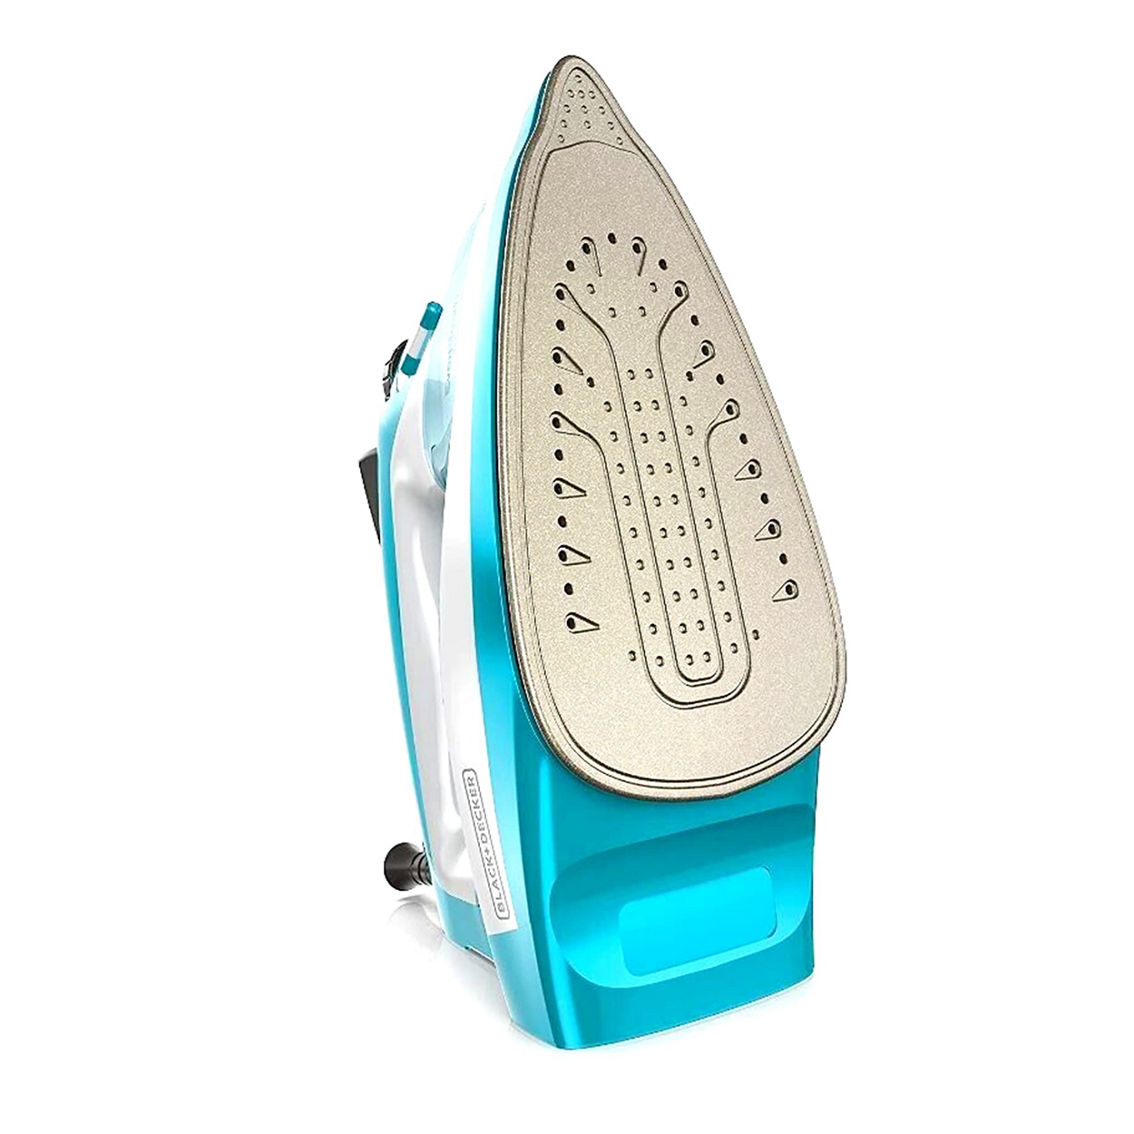 Black+Decker One Step Steam Iron in Turquoise - Image 2 of 4